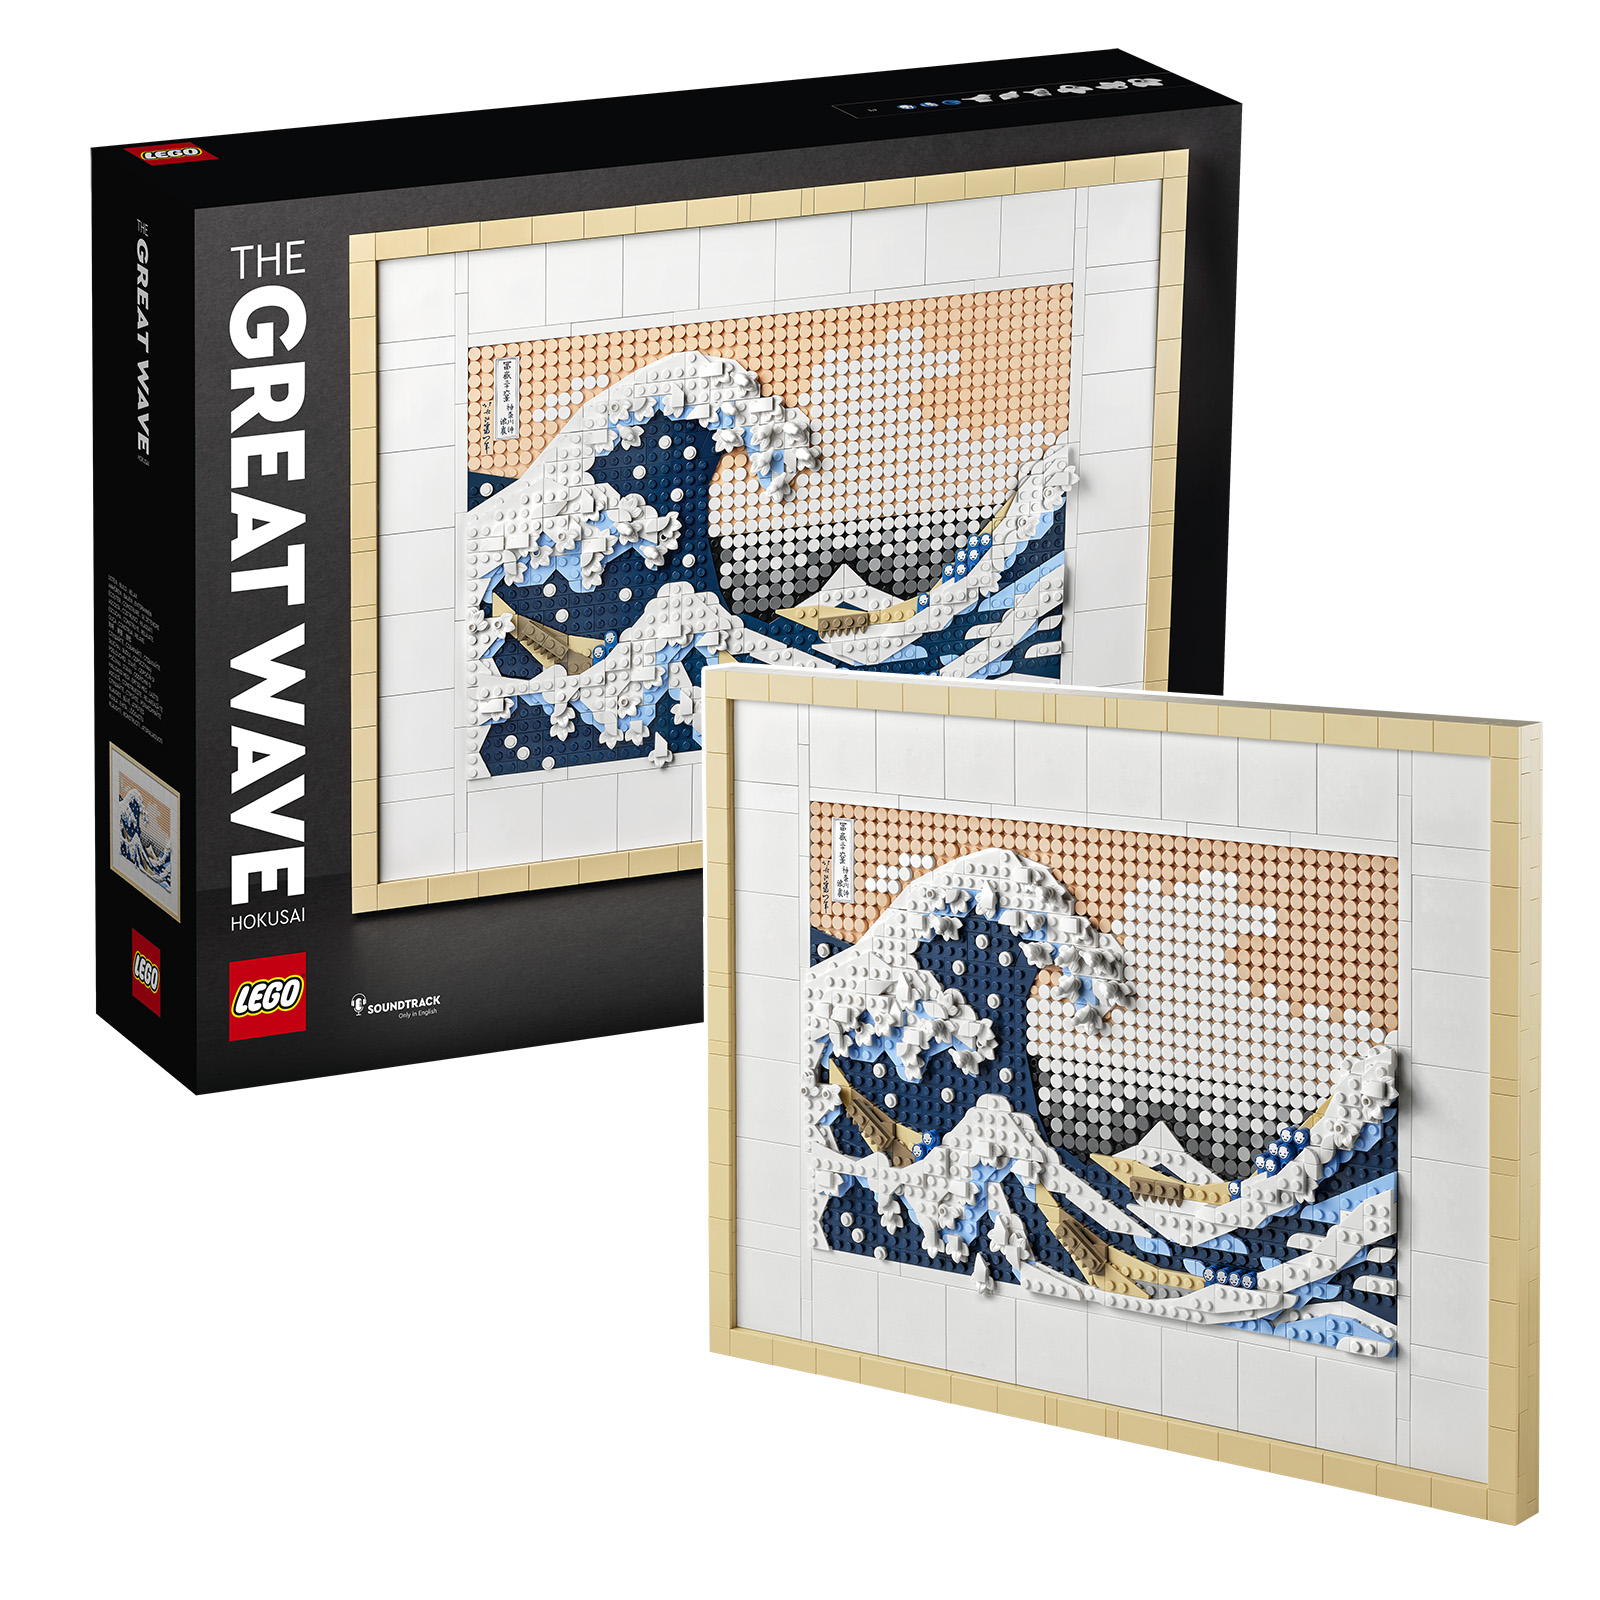 ▻ In January 2023 in the LEGO ART range: 31208 Hokusai The Great Wave -  HOTH BRICKS